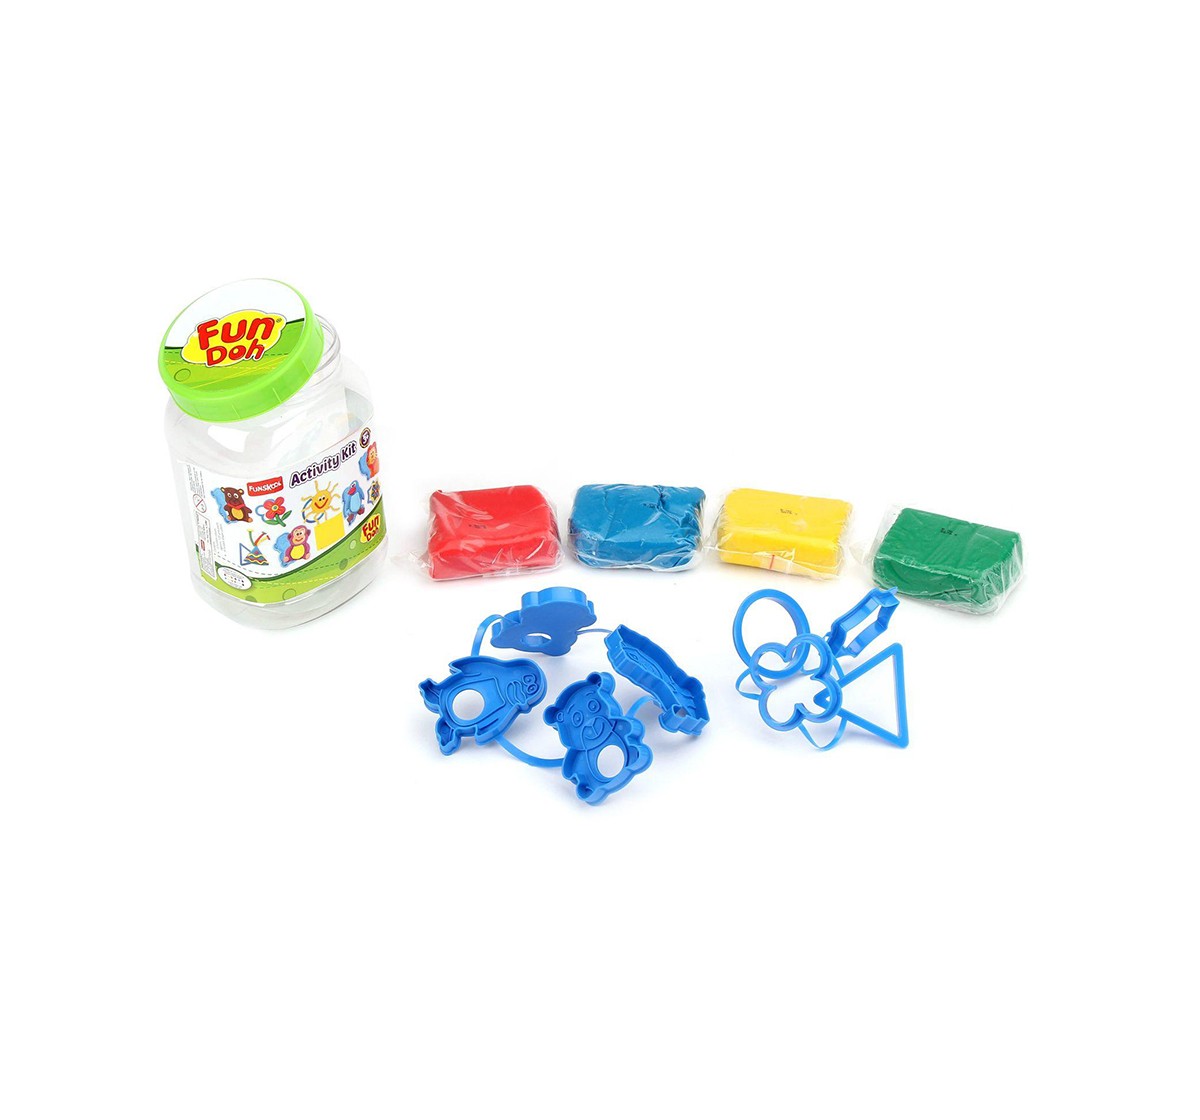 Fun Dough Activity Kit Clay & Dough for Kids Age 3Y+